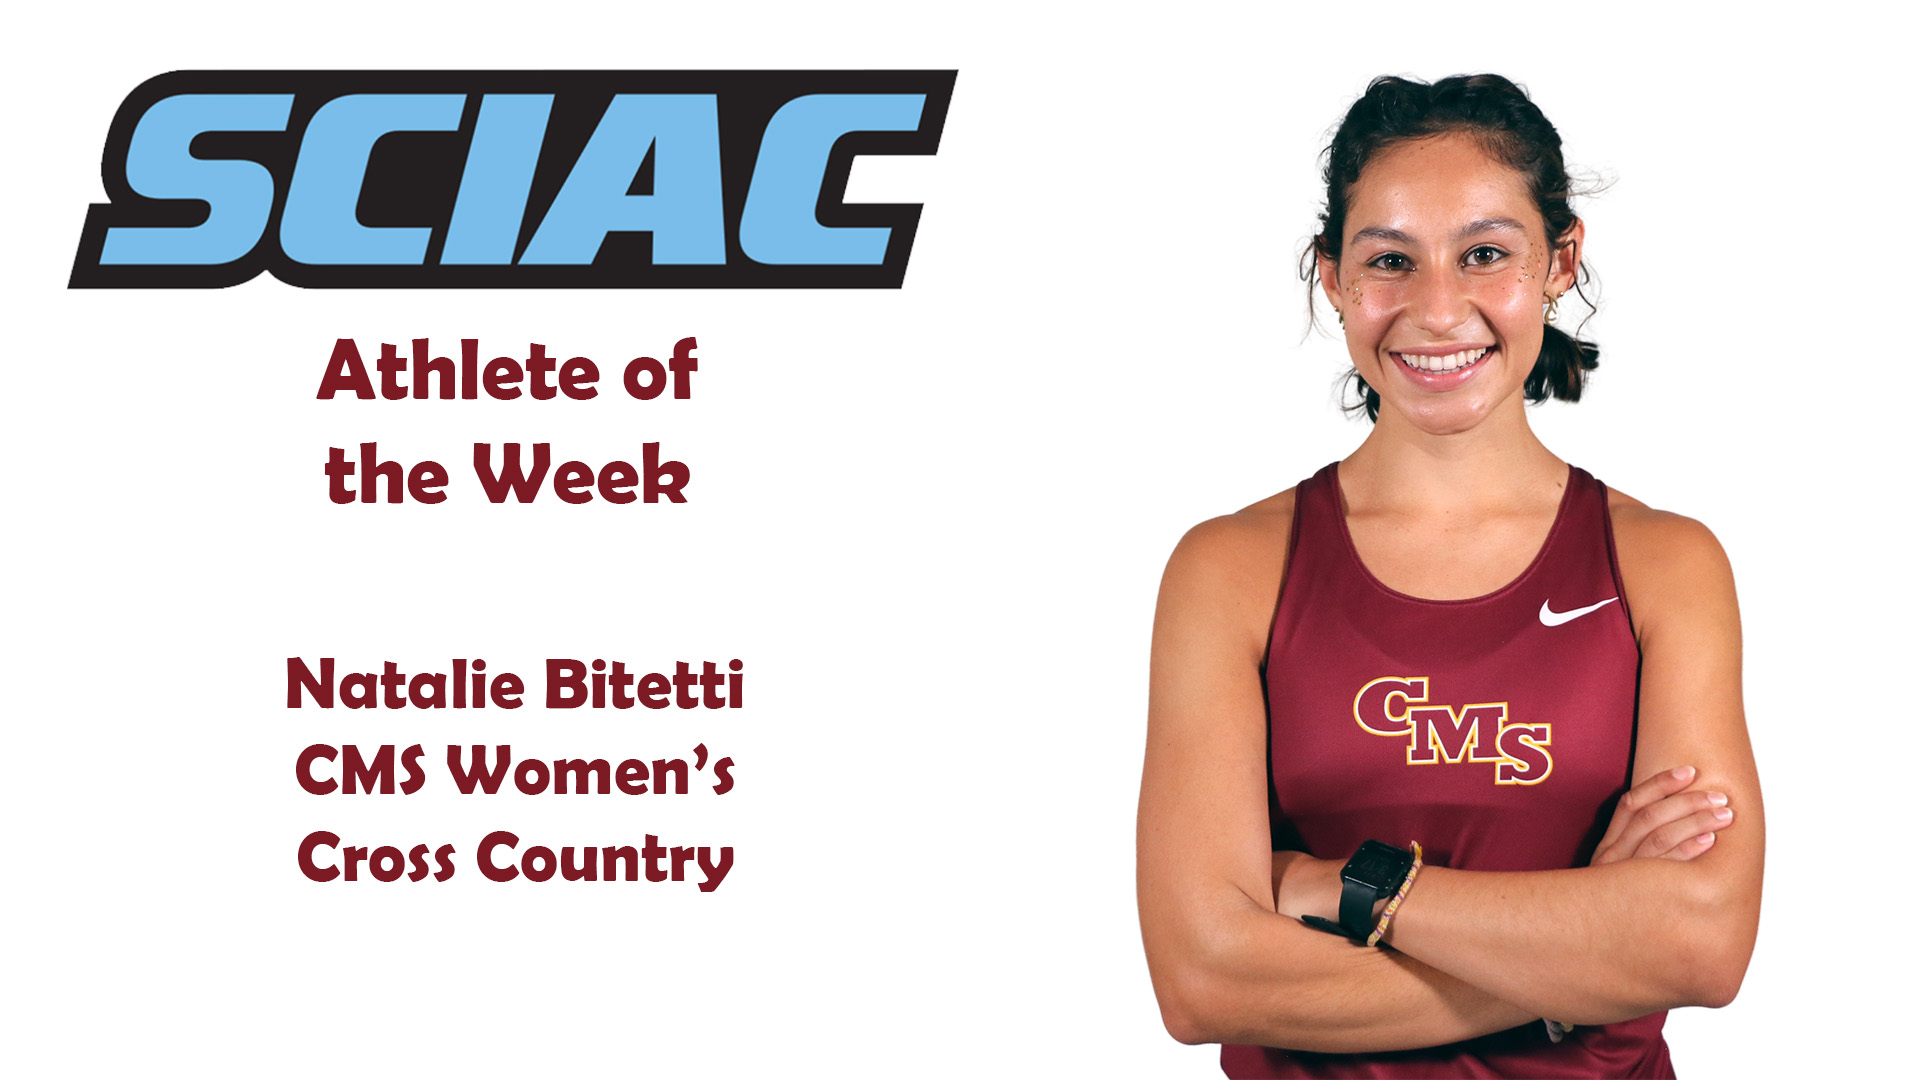 Posed shot of Natalie Bitetti with the SCIAC logo